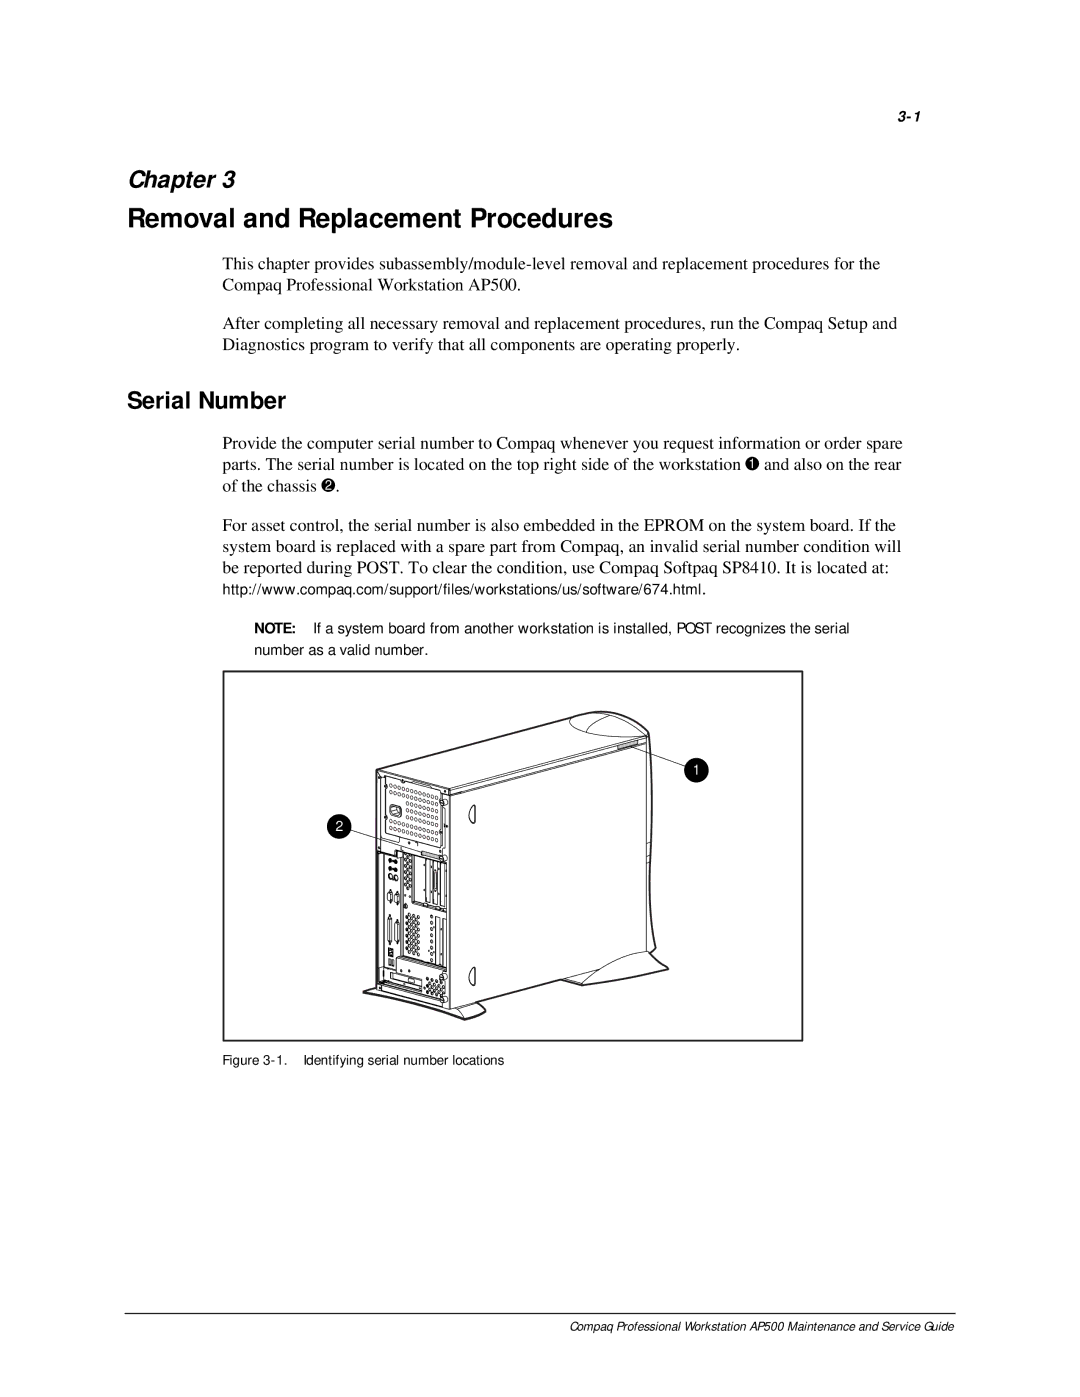 Compaq AP500 manual Removal and Replacement Procedures, Serial Number 